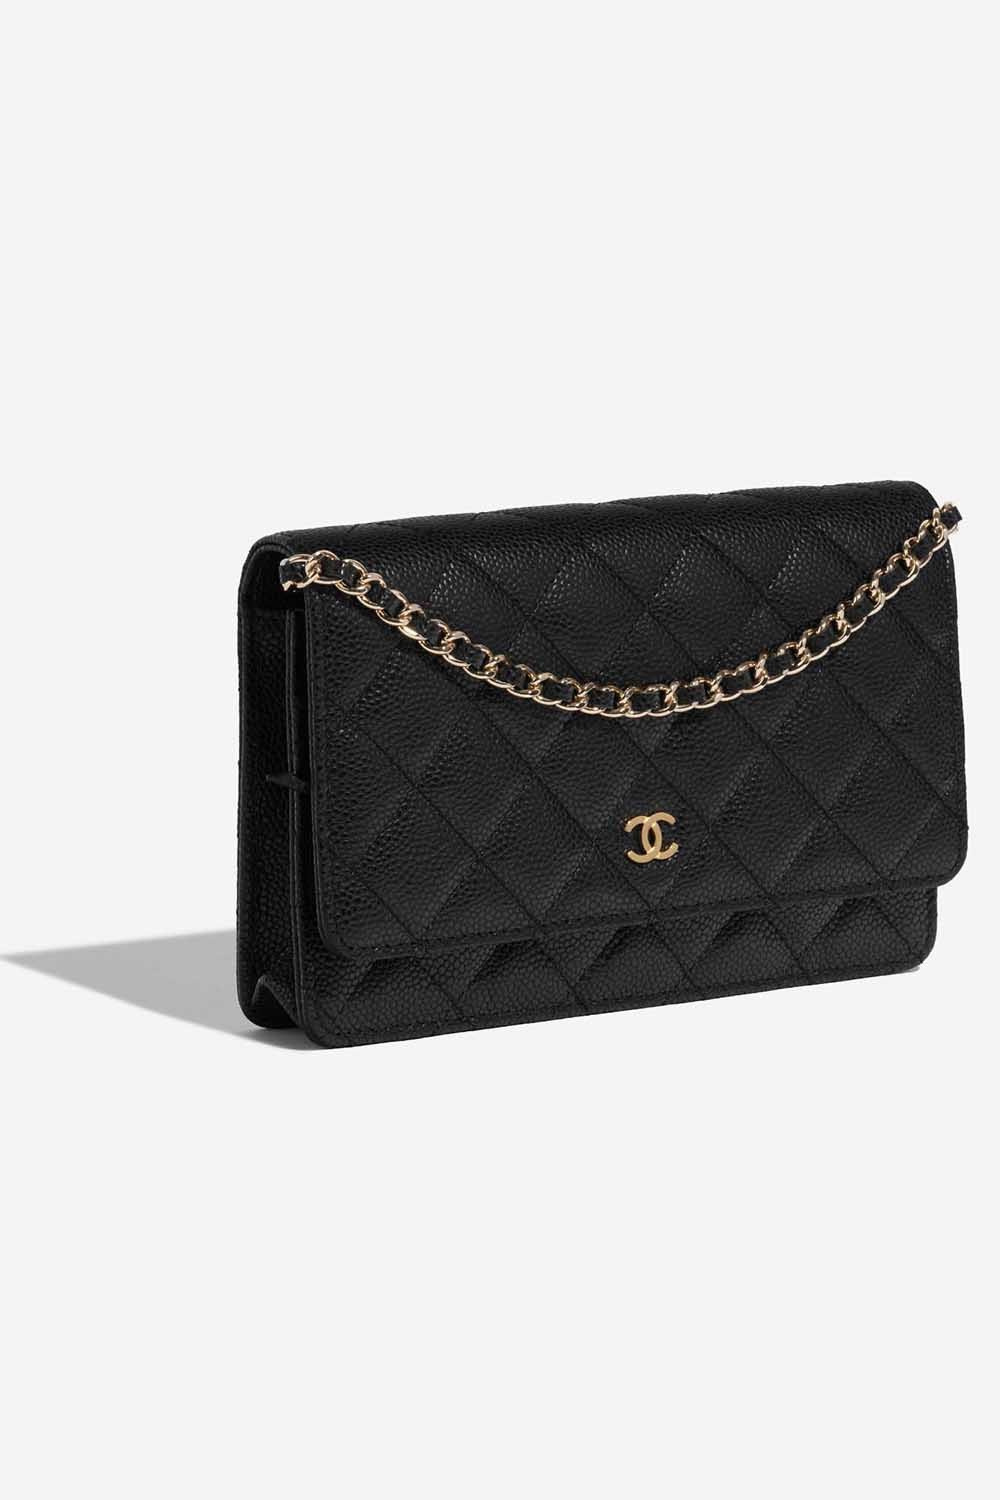 Chanel - Wallet On Chain Bag - Black